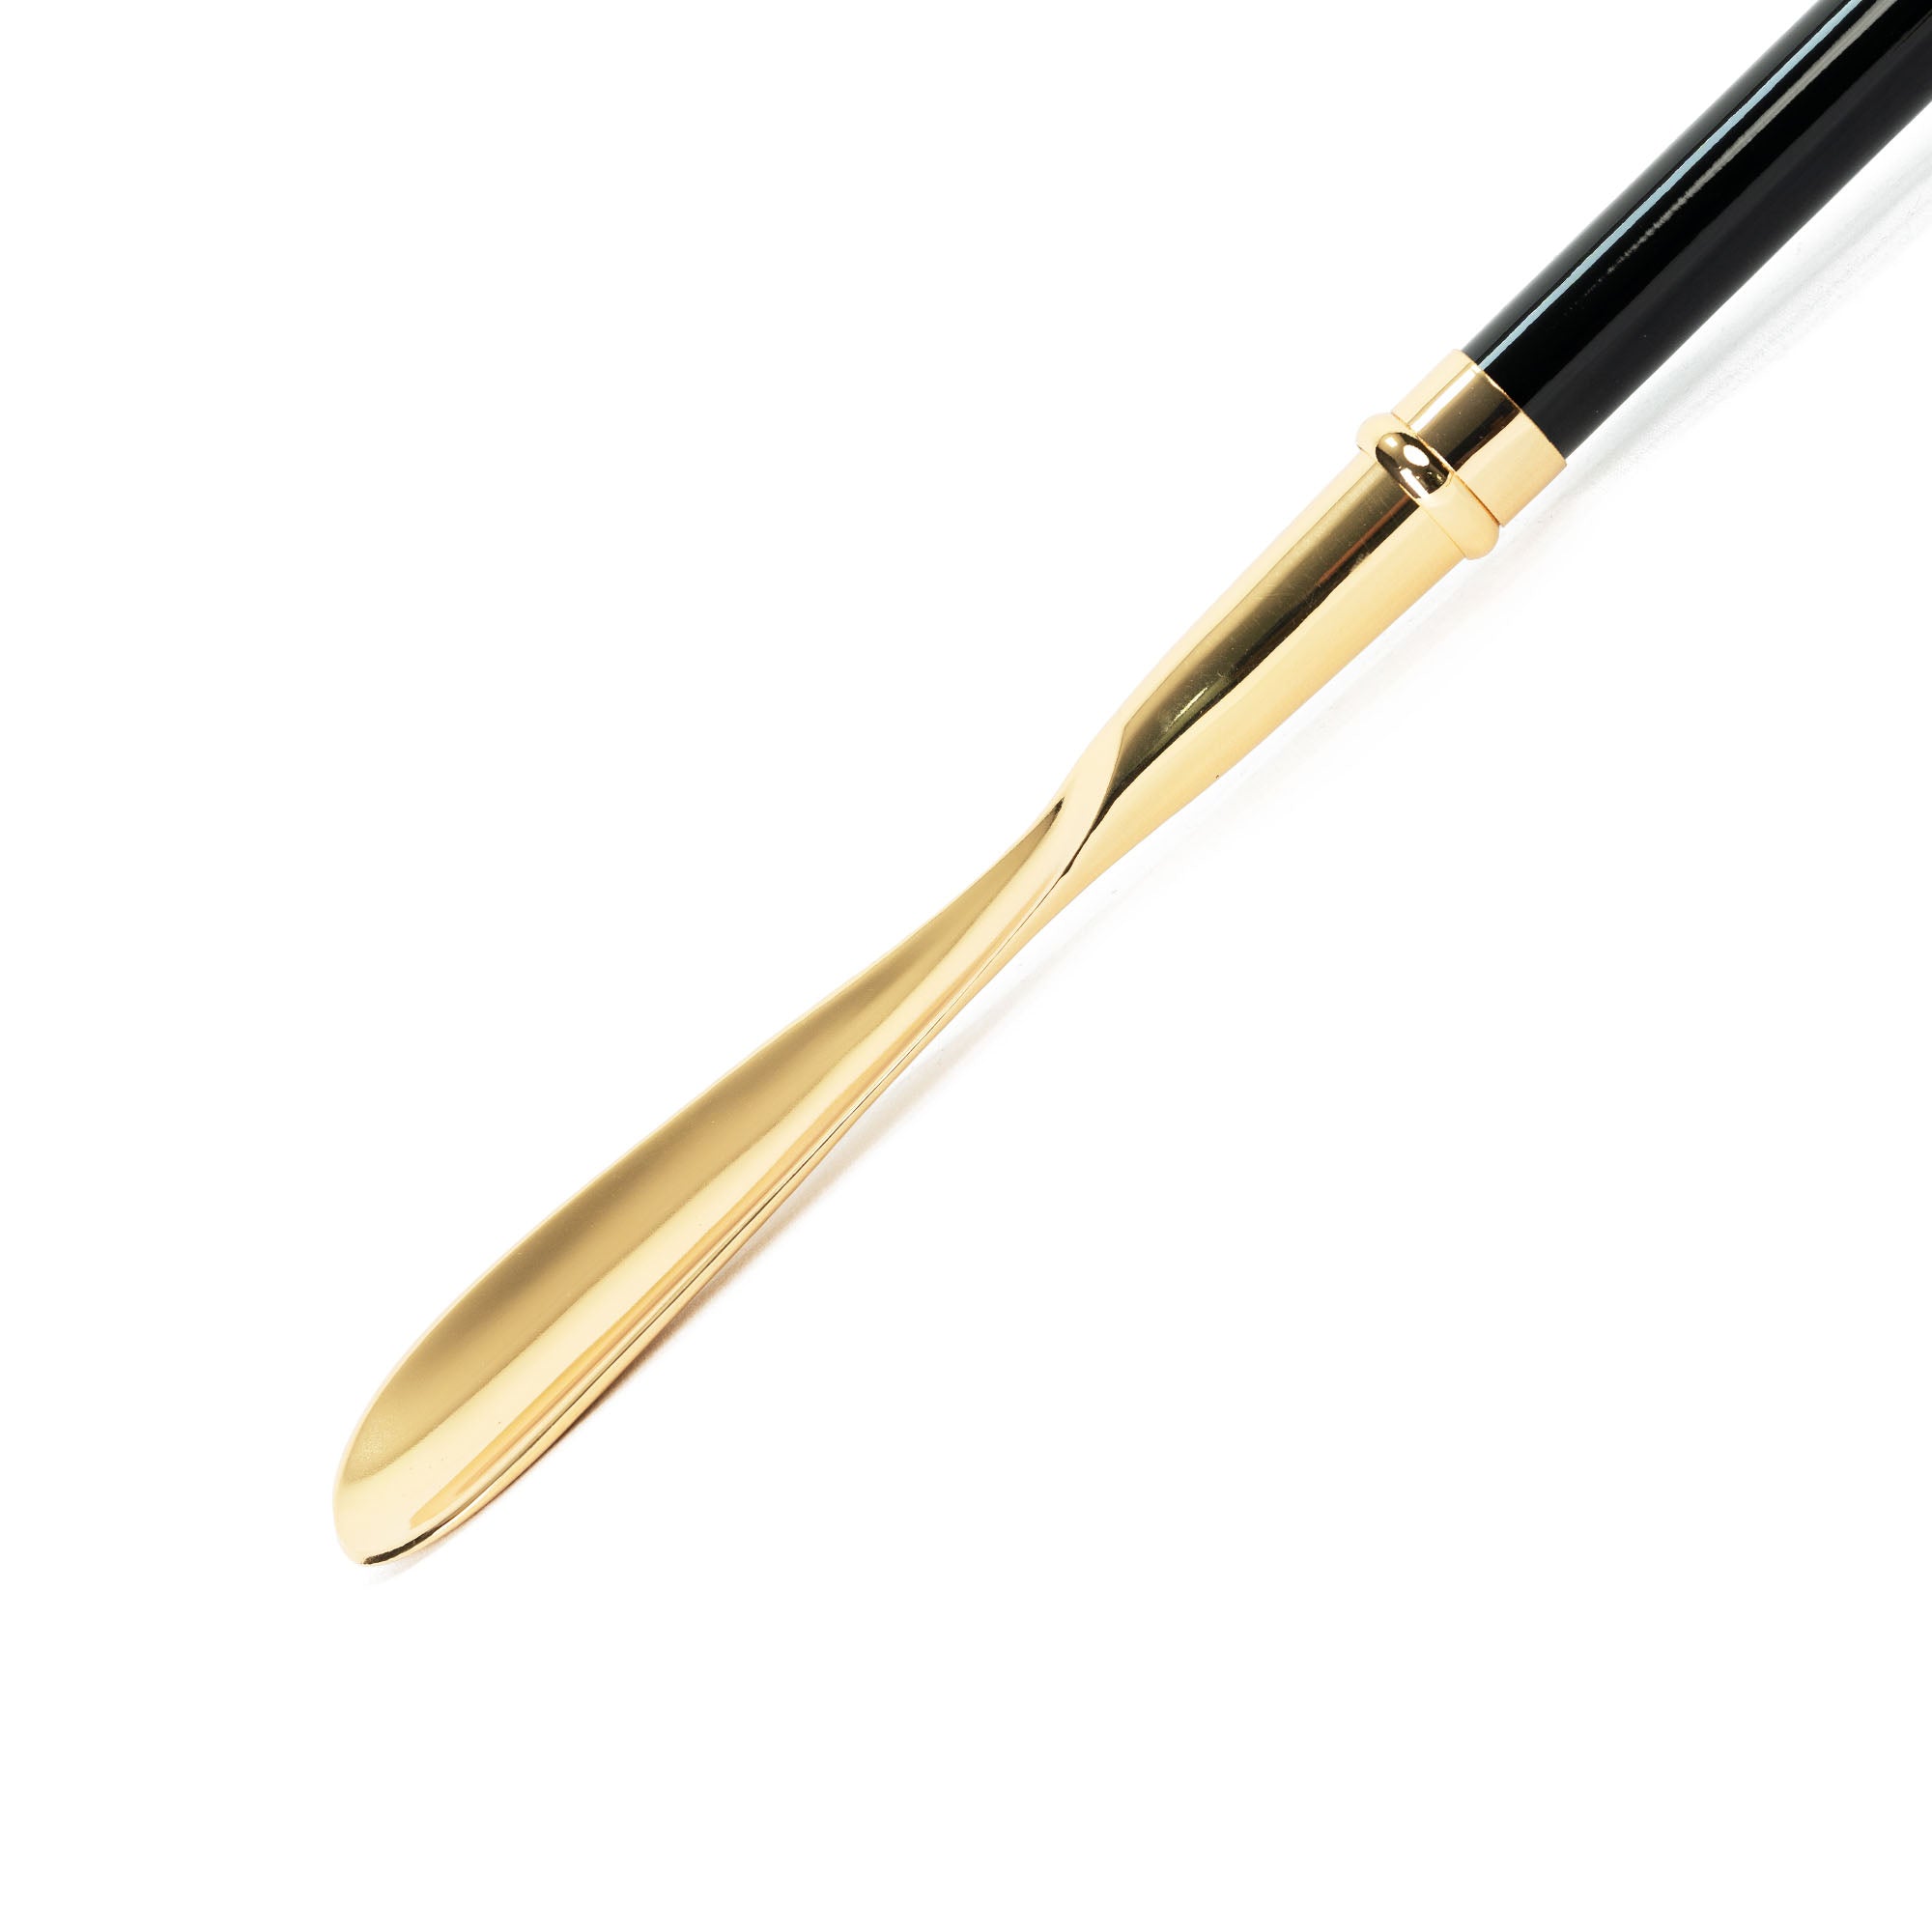 Dolphin Delight: Hand-Painted 24K Gold-Plated Dolphin Shoehorn